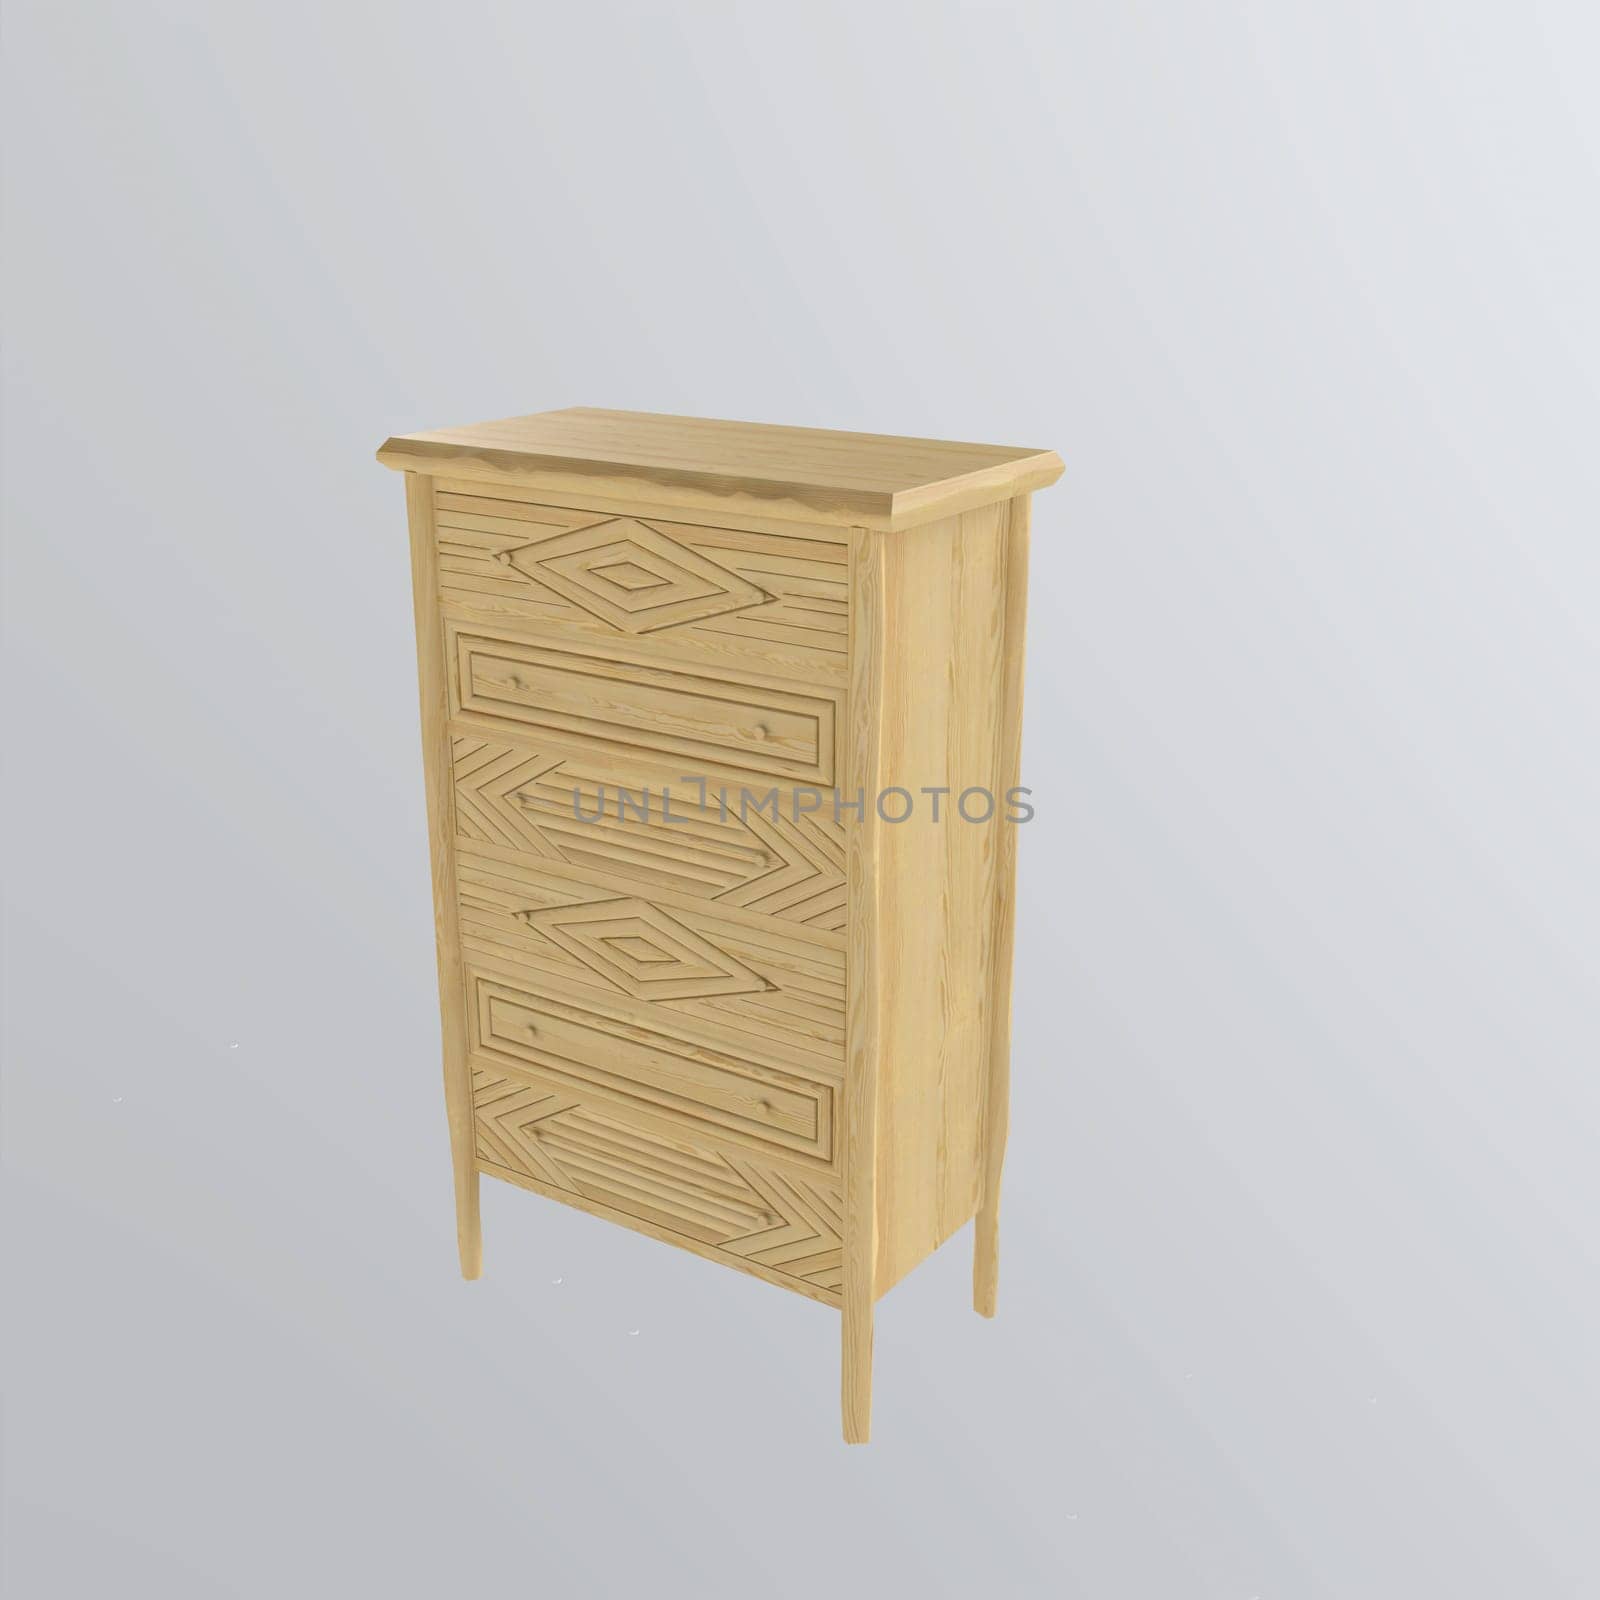 Furniture isolated on white background. High quality 3d illustration